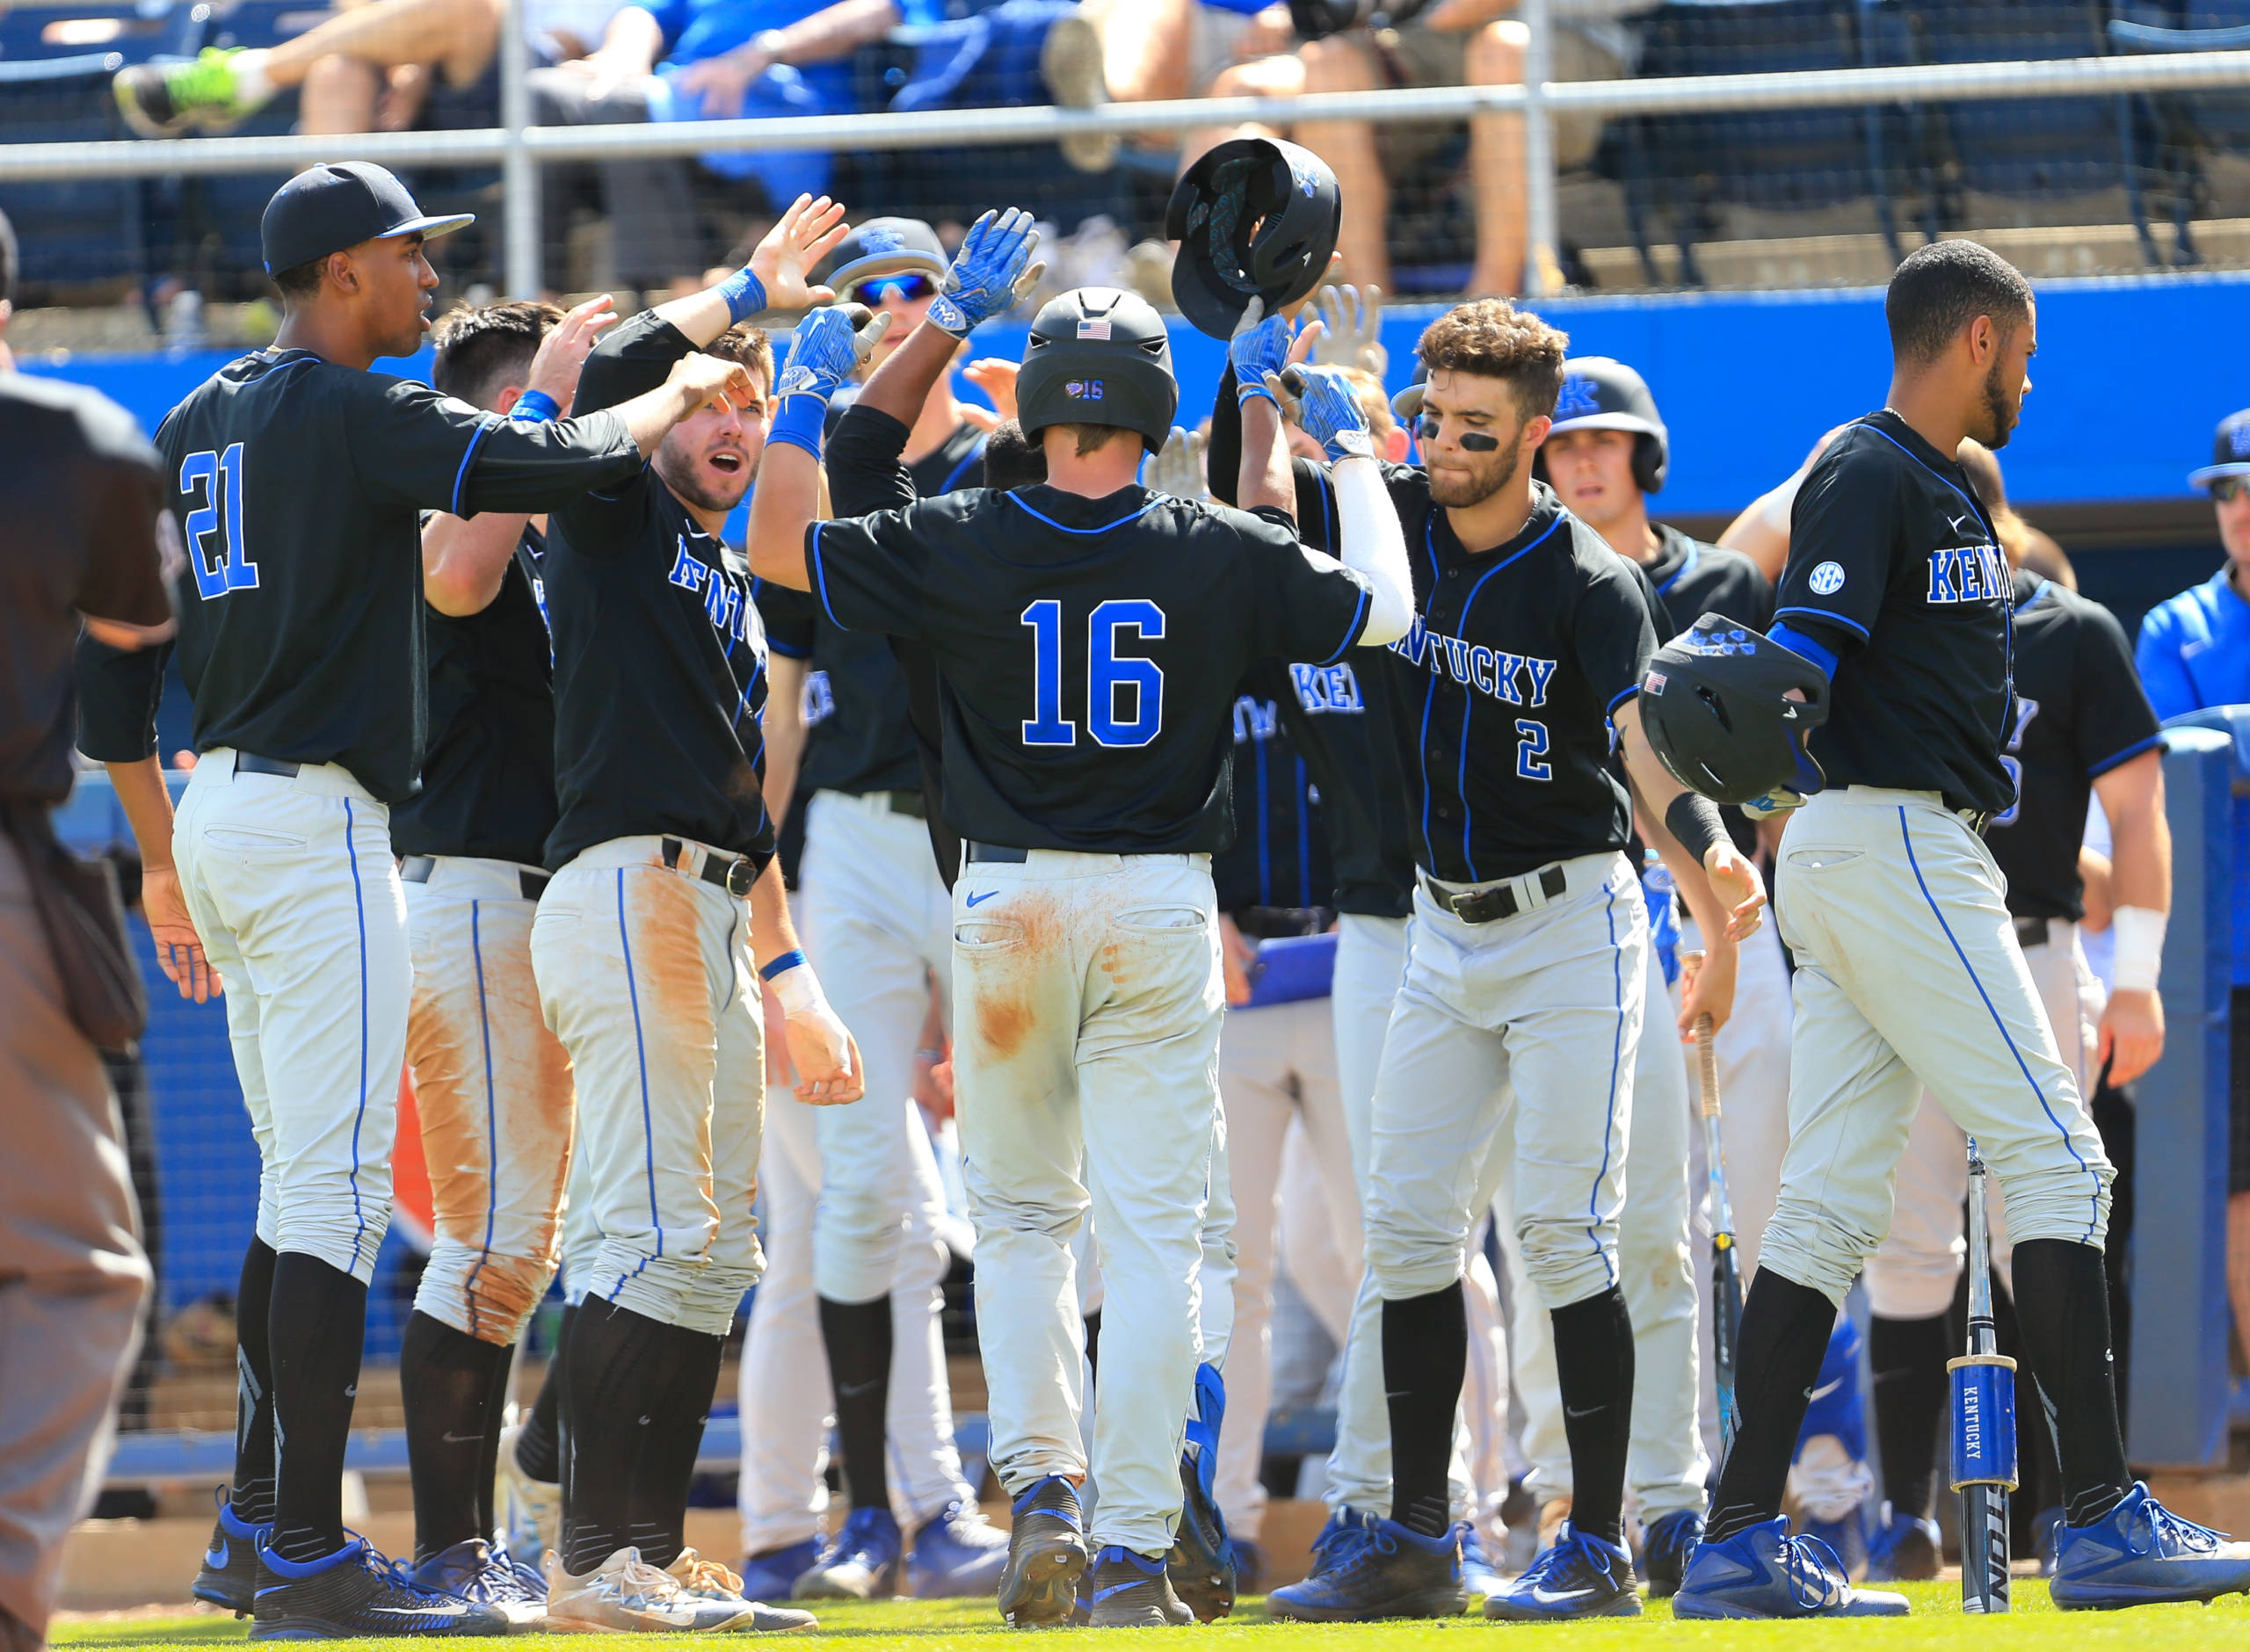 No. 6 Cats finish with 19 league wins, earn No. 3 seed in SEC Tournament